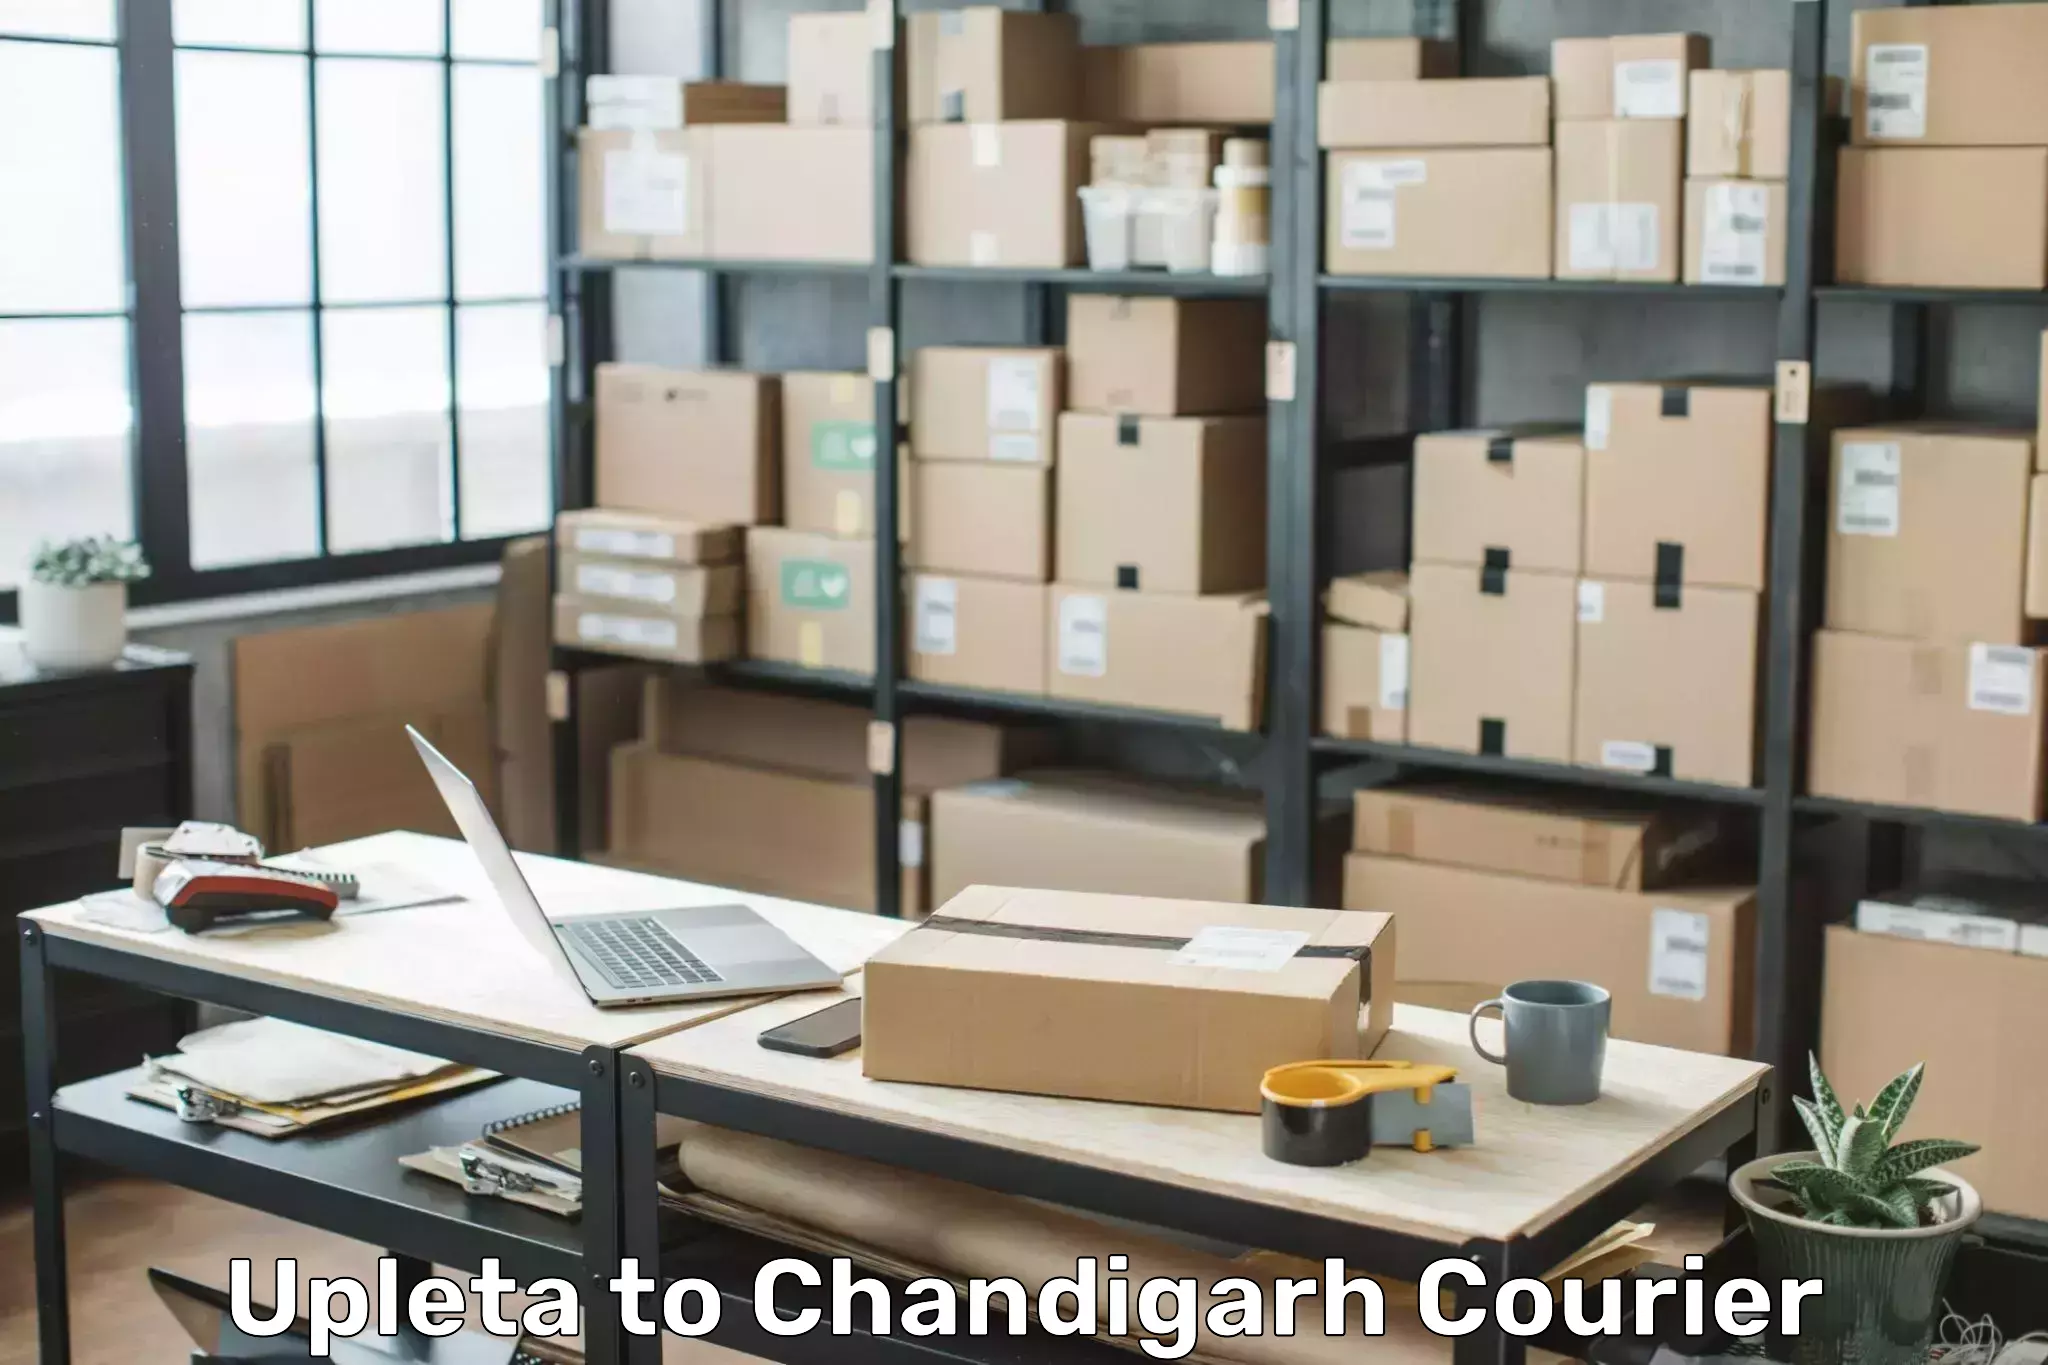 Luggage delivery app Upleta to Chandigarh